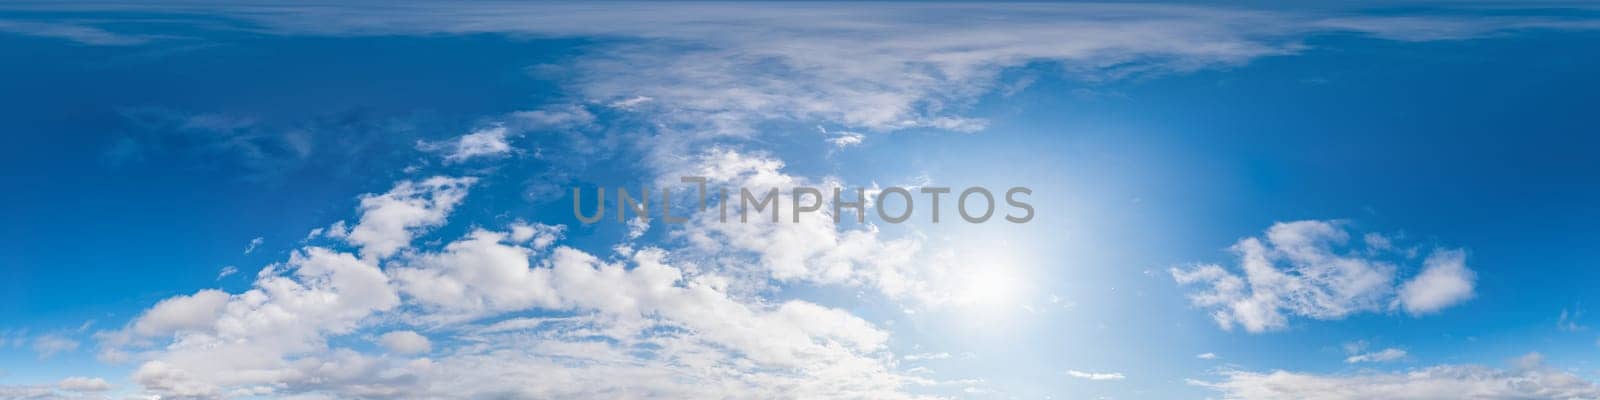 360 panorama of glowing sunset sky with bright Cirrus clouds. Seamless hdr spherical 360 panorama. Sky dome in 3D visualization, sky replacement for aerial drone panoramas. Weather and climate change.